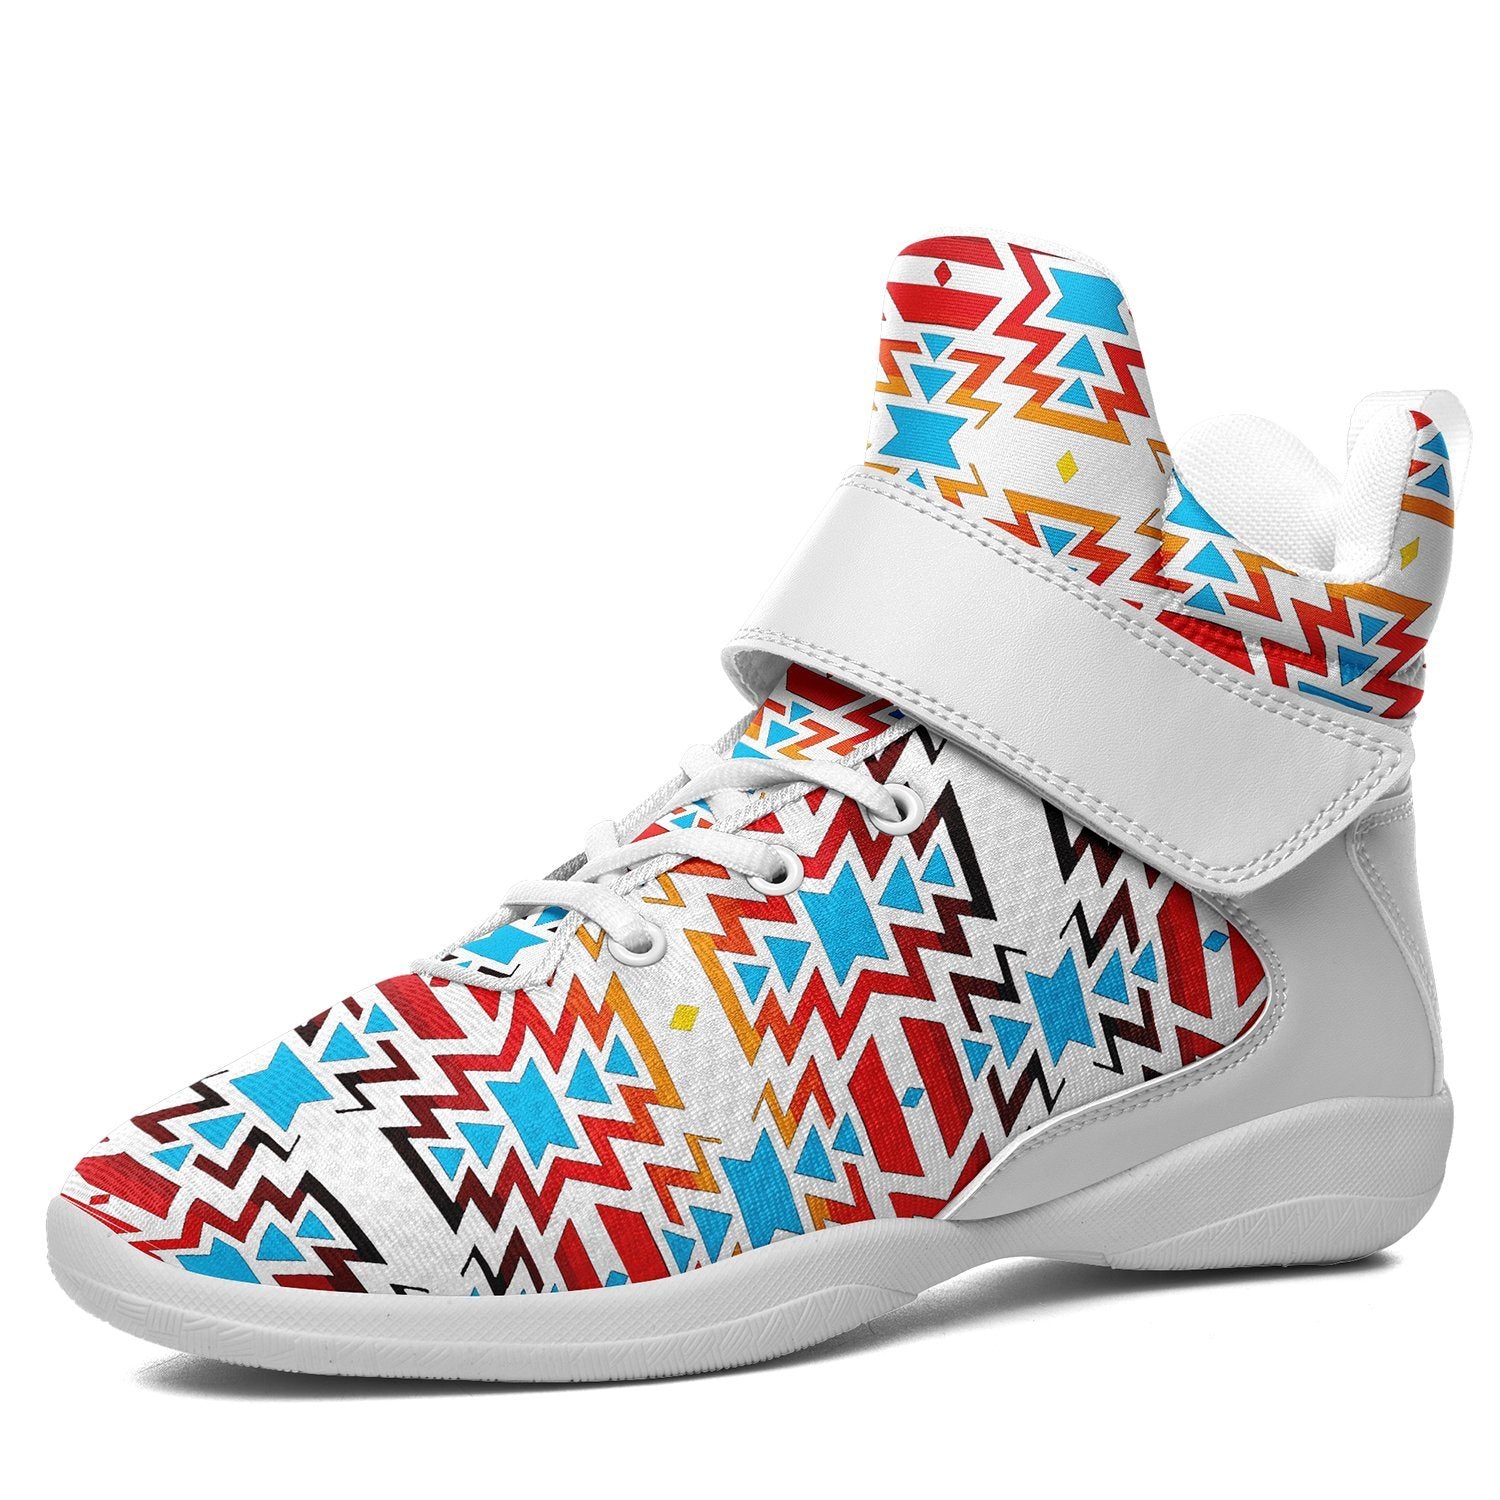 Fire Colors and Sky Ipottaa Basketball / Sport High Top Shoes 49 Dzine US Women 4.5 / US Youth 3.5 / EUR 35 White Sole with White Strap 